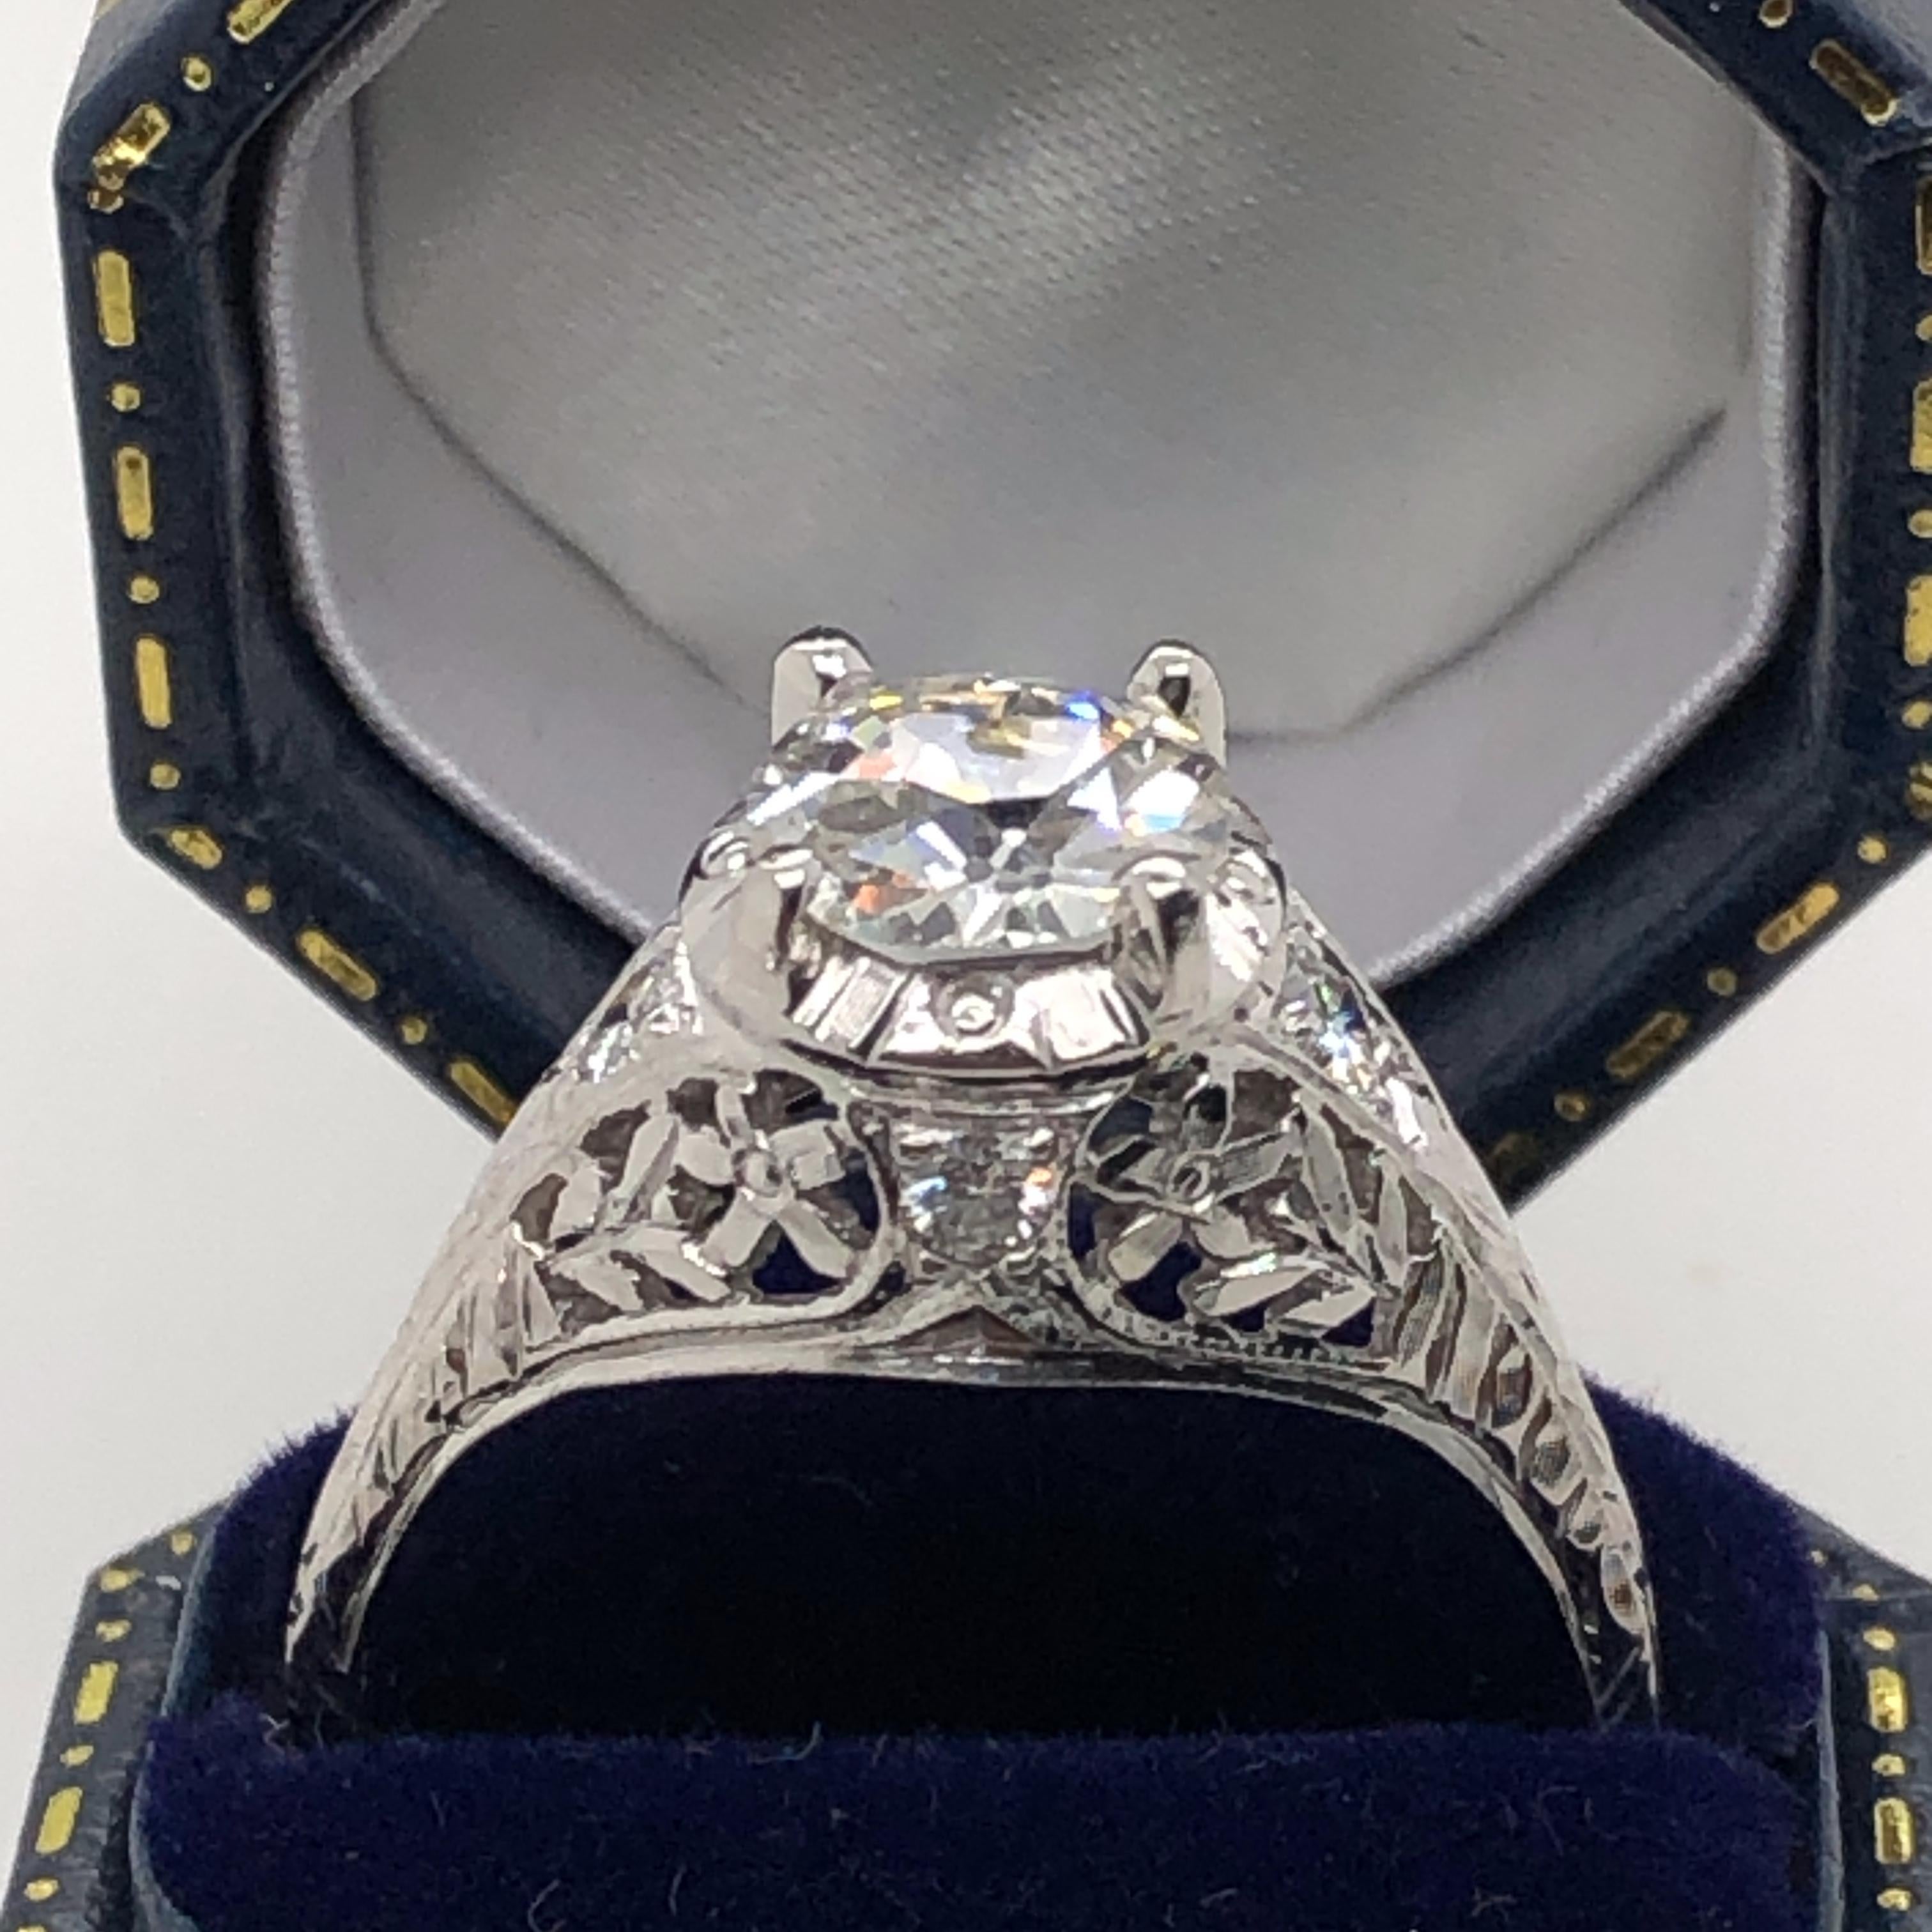 One 14 karat gold (stamped 14K) estate filigree engagement ring set with one Old European cut diamond, 1.32 carat total weight with M color and VS2 clarity. Finger size 7.  
